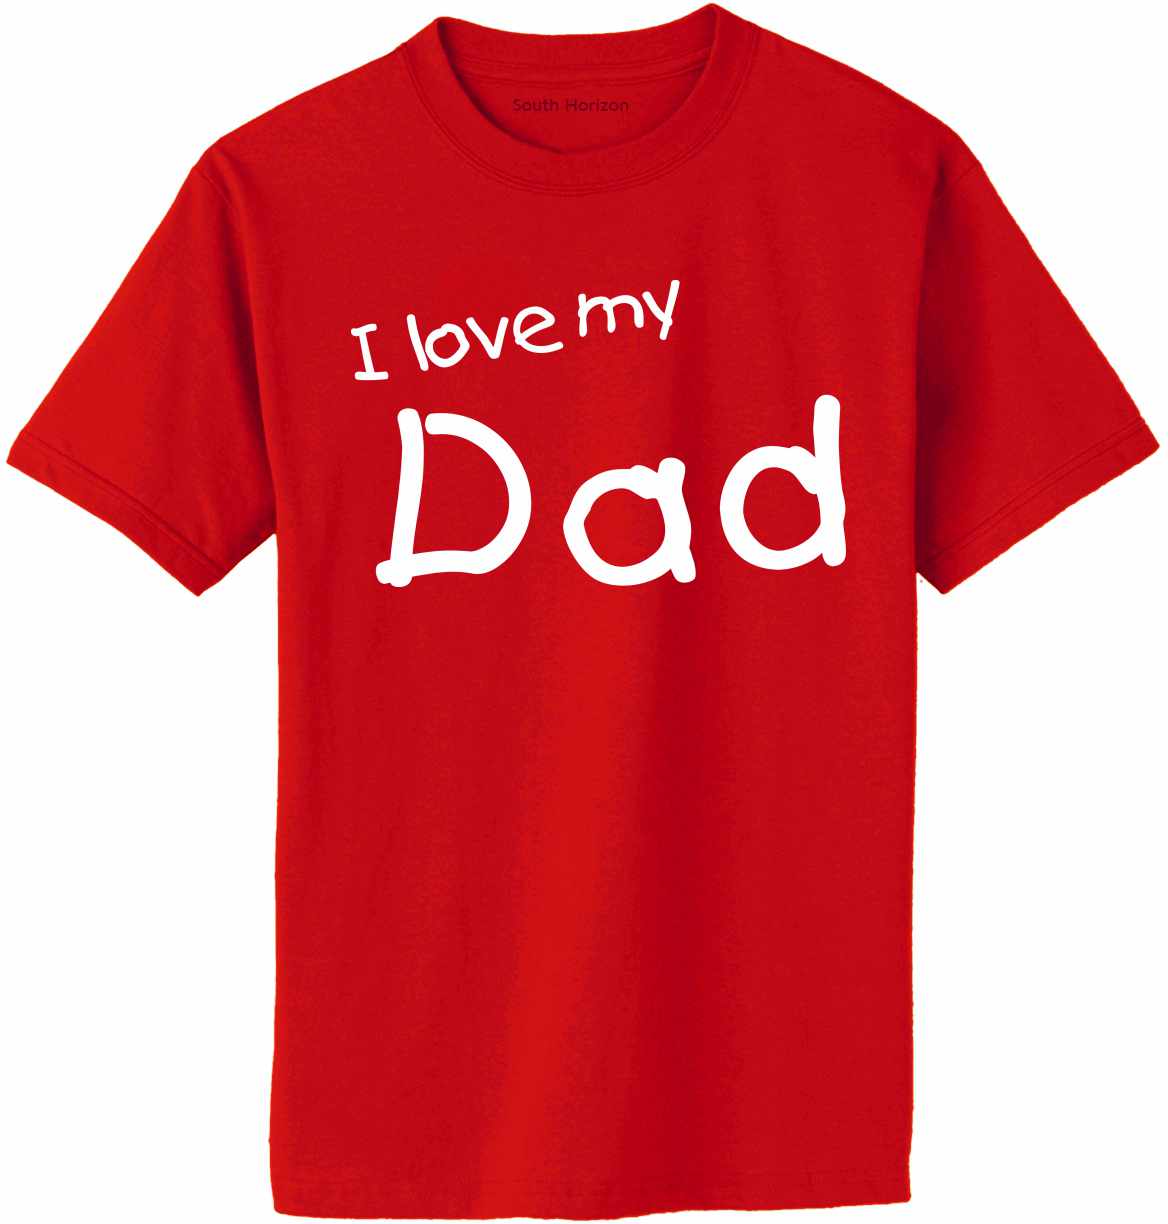 I Love My Dad on Adult T-Shirt